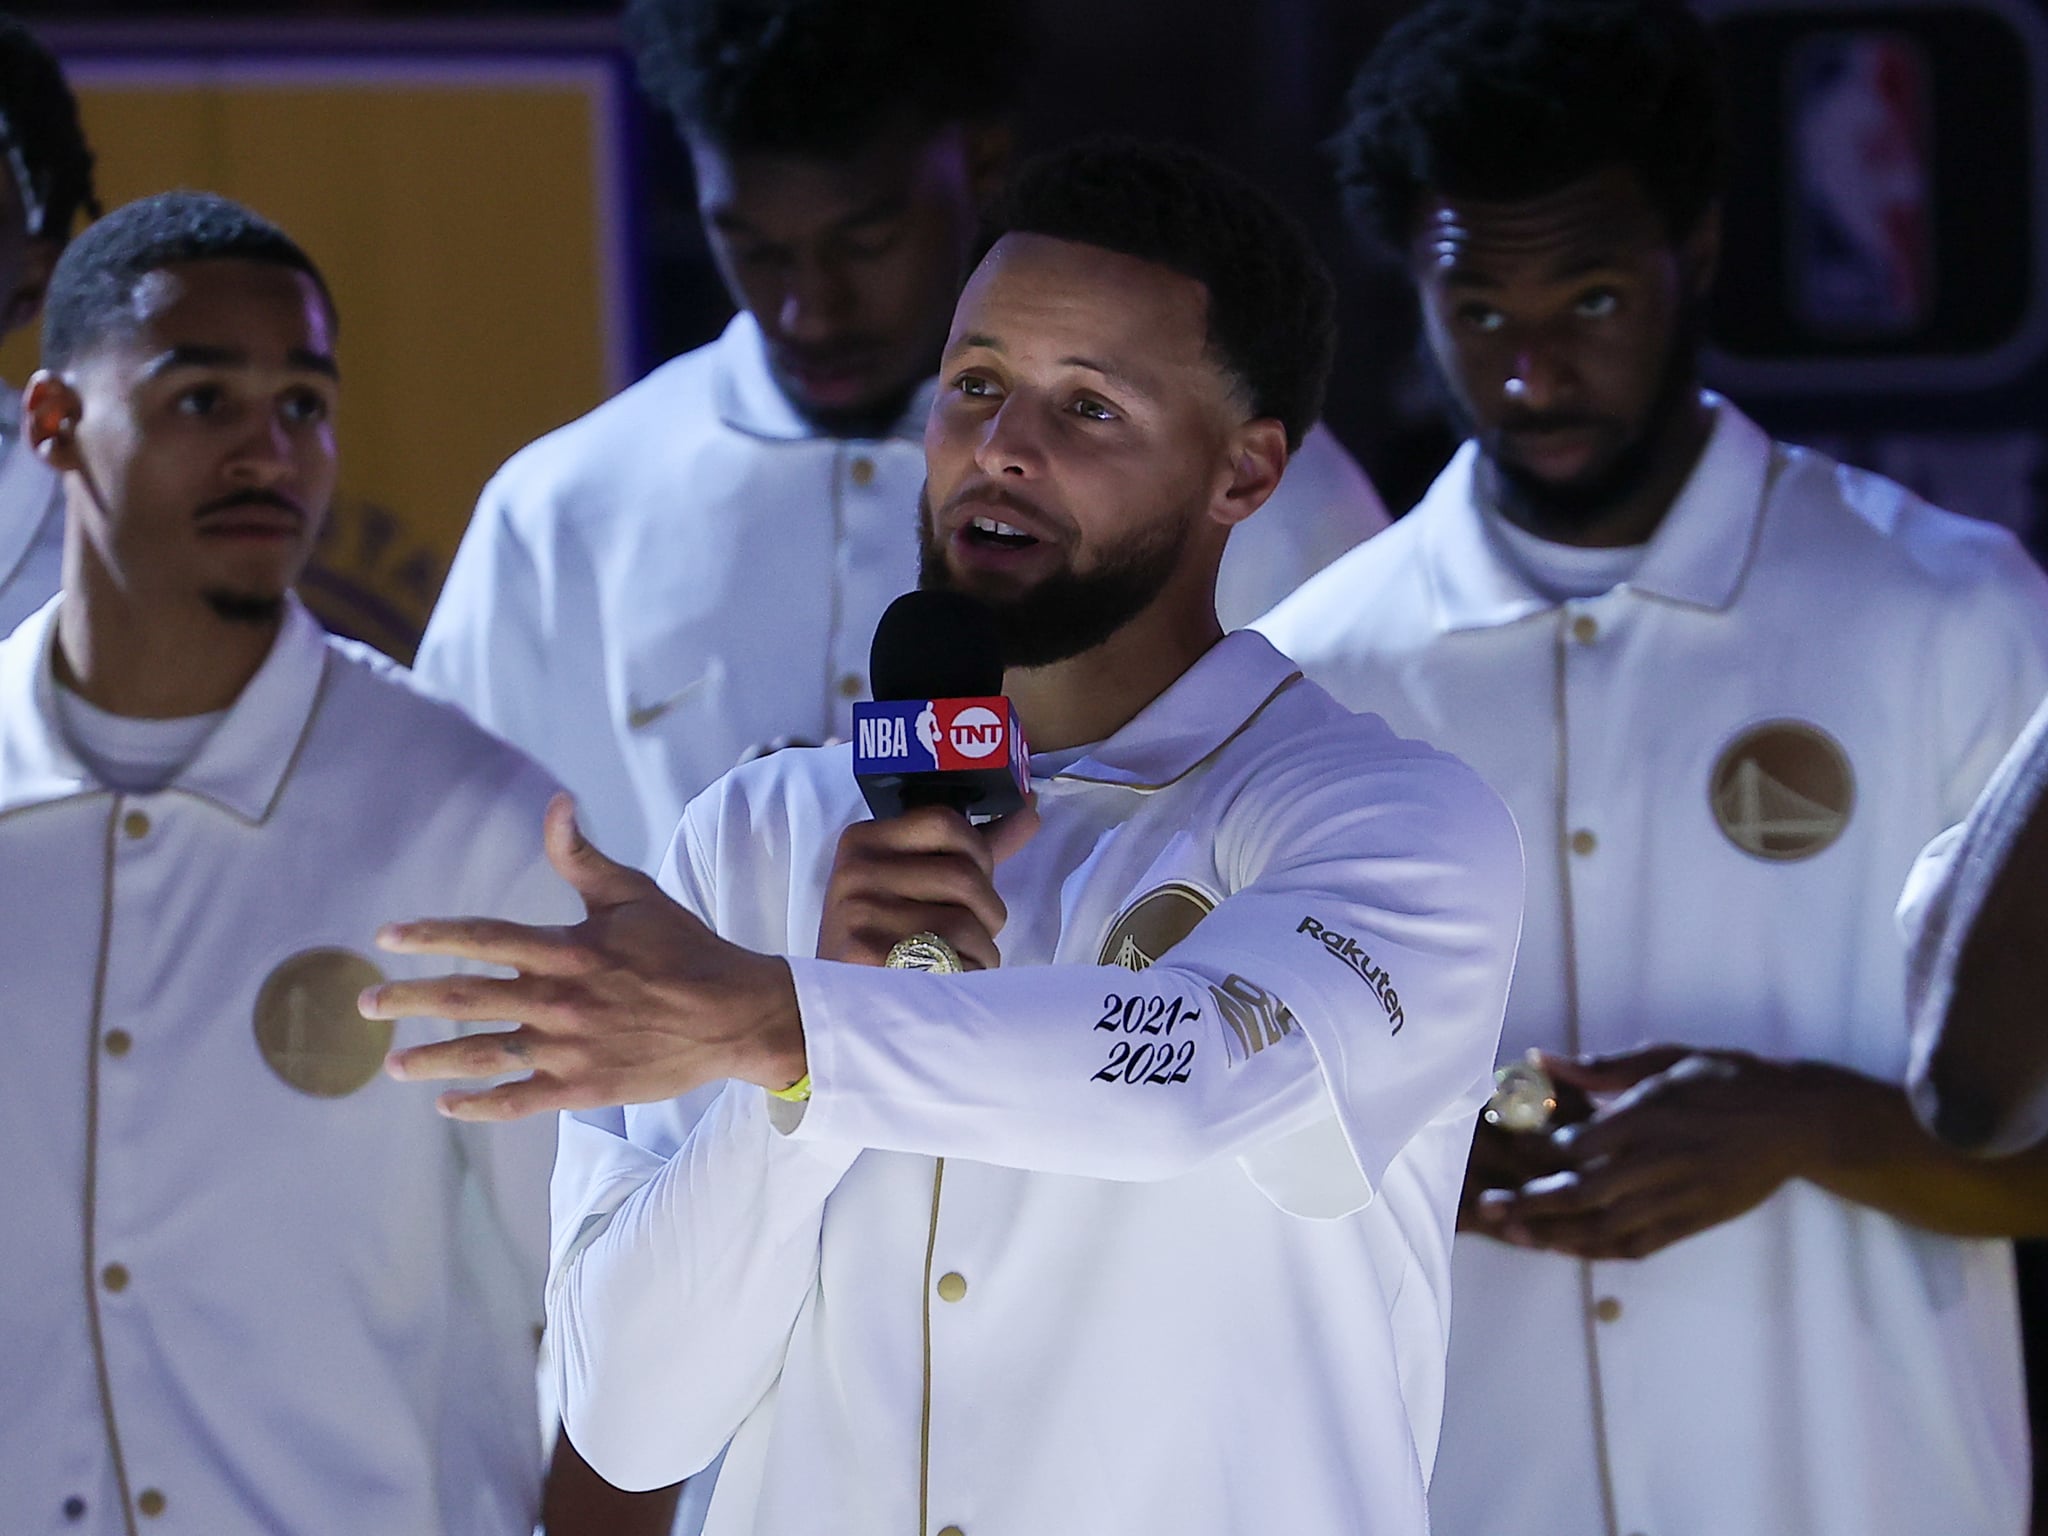 SAN FRANCISCO, CA - OCTOBER 18: Stephen Curry of Golden State Warriors speaks at the Champions Ring Night Ceremony before NBA game between Golden State Warriors and Los Angeles Lakers at the Chase Centre on October 18, 2022 in San Francisco, California, United States. (Photo by Tayfun Coskun/Anadolu Agency via Getty Images)